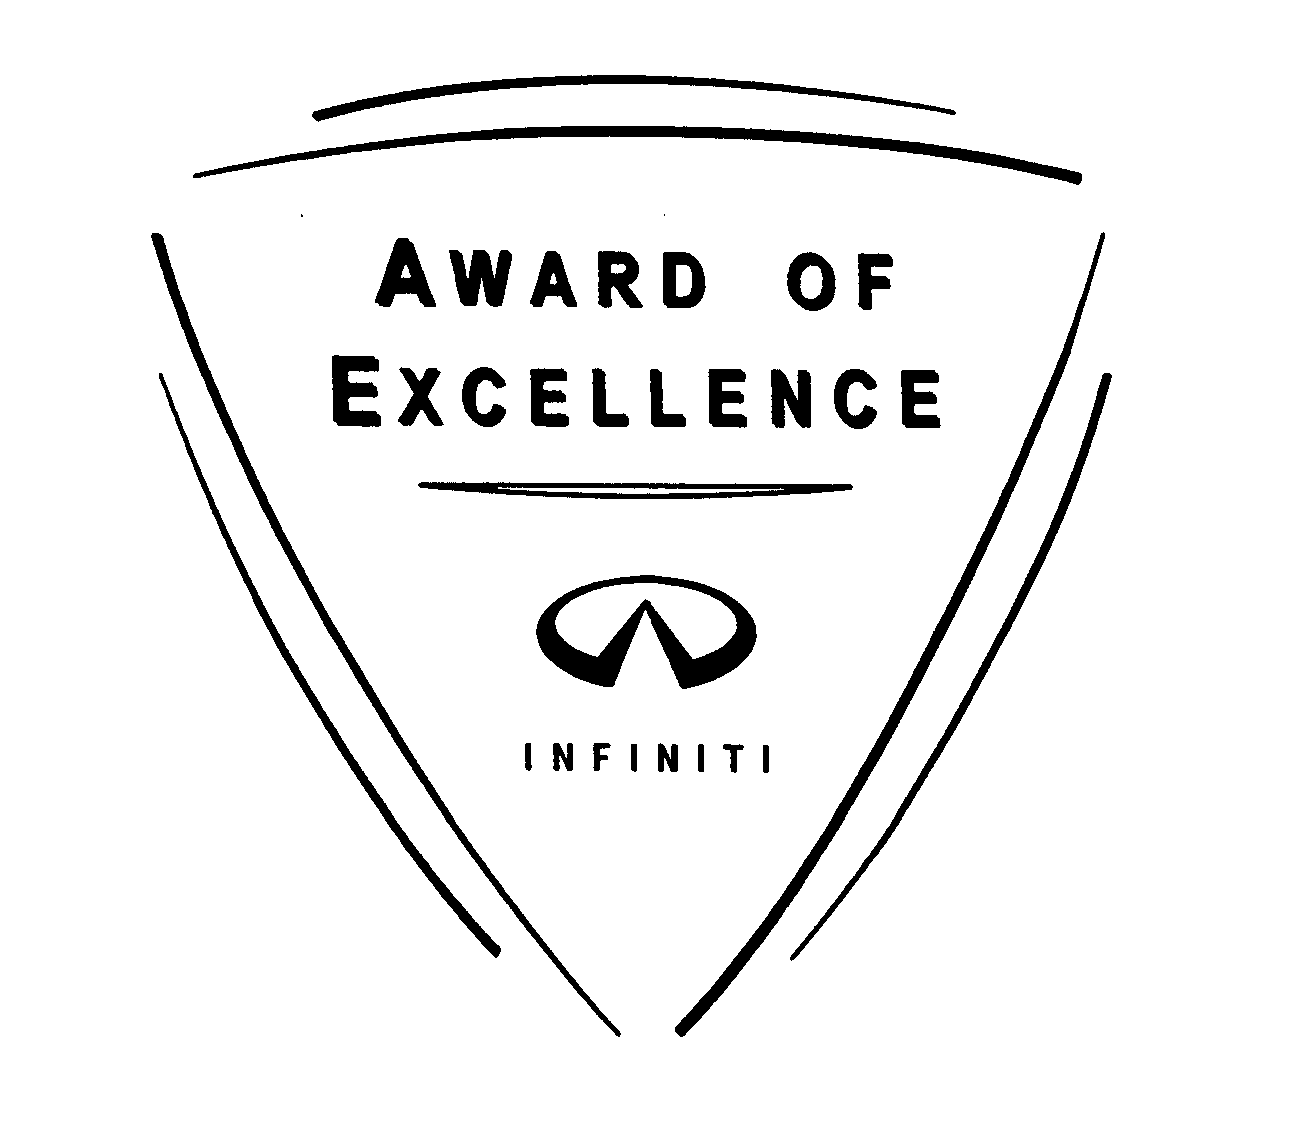  INFINITI AWARD OF EXCELLENCE